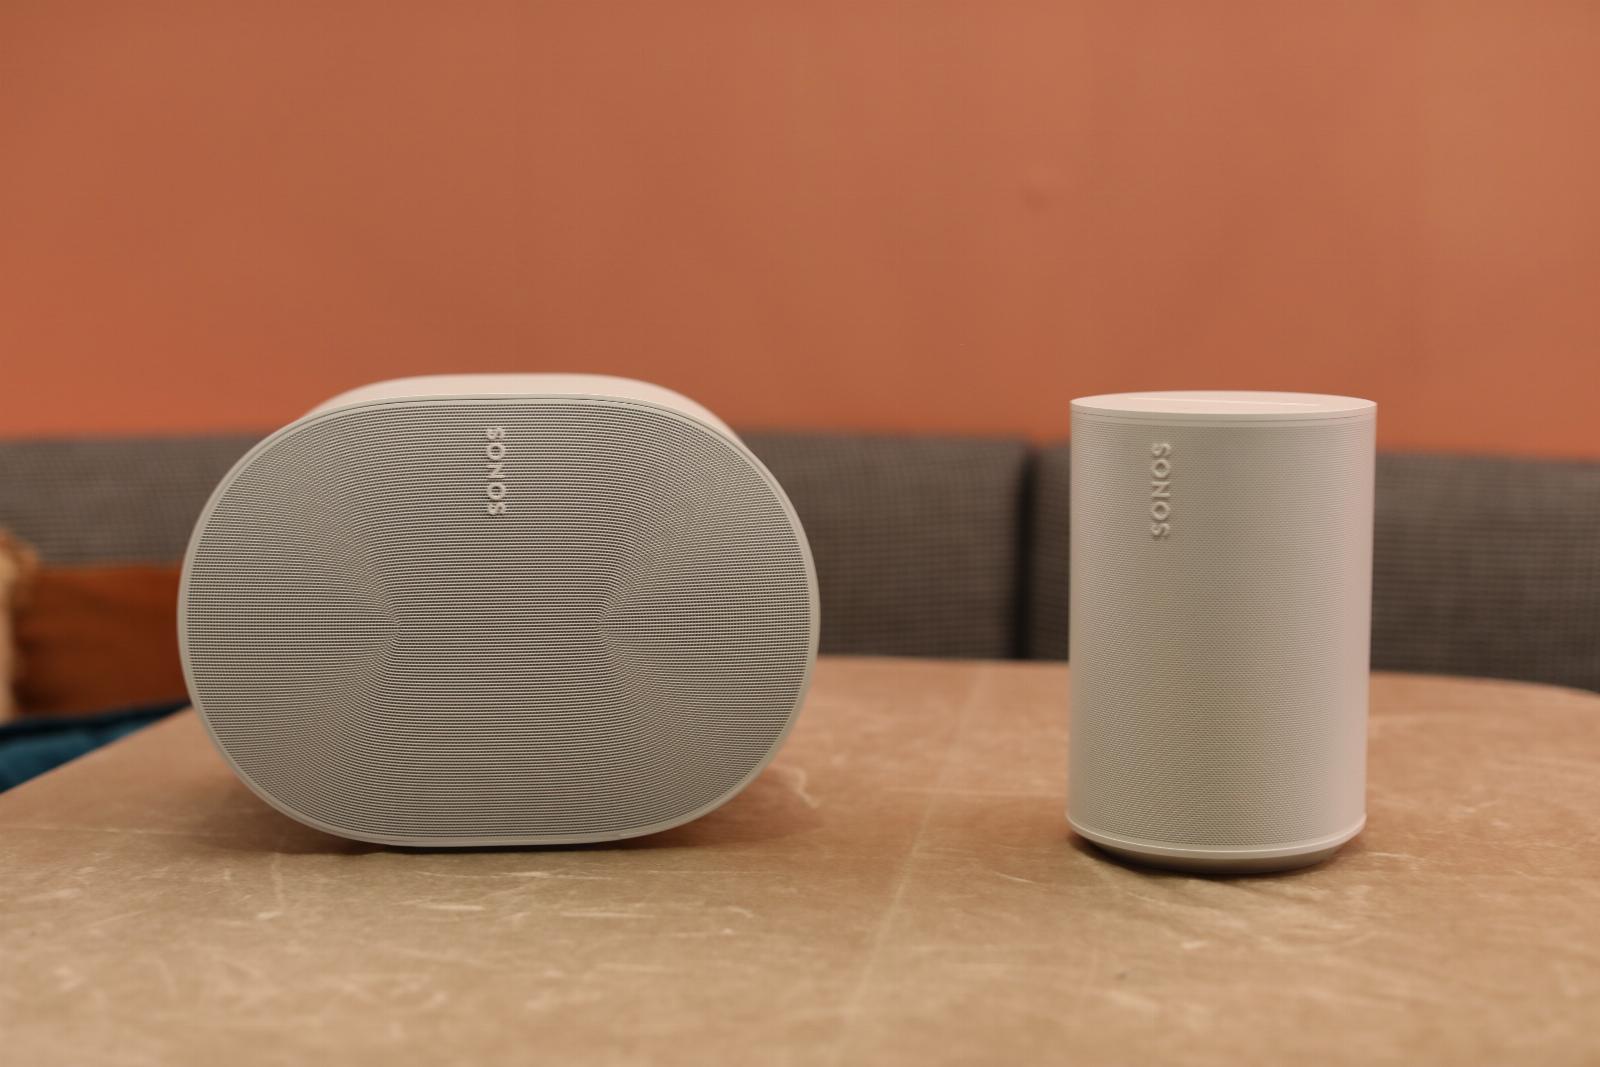 Sonos replaces the One, adds a spatial audio speaker to lineup